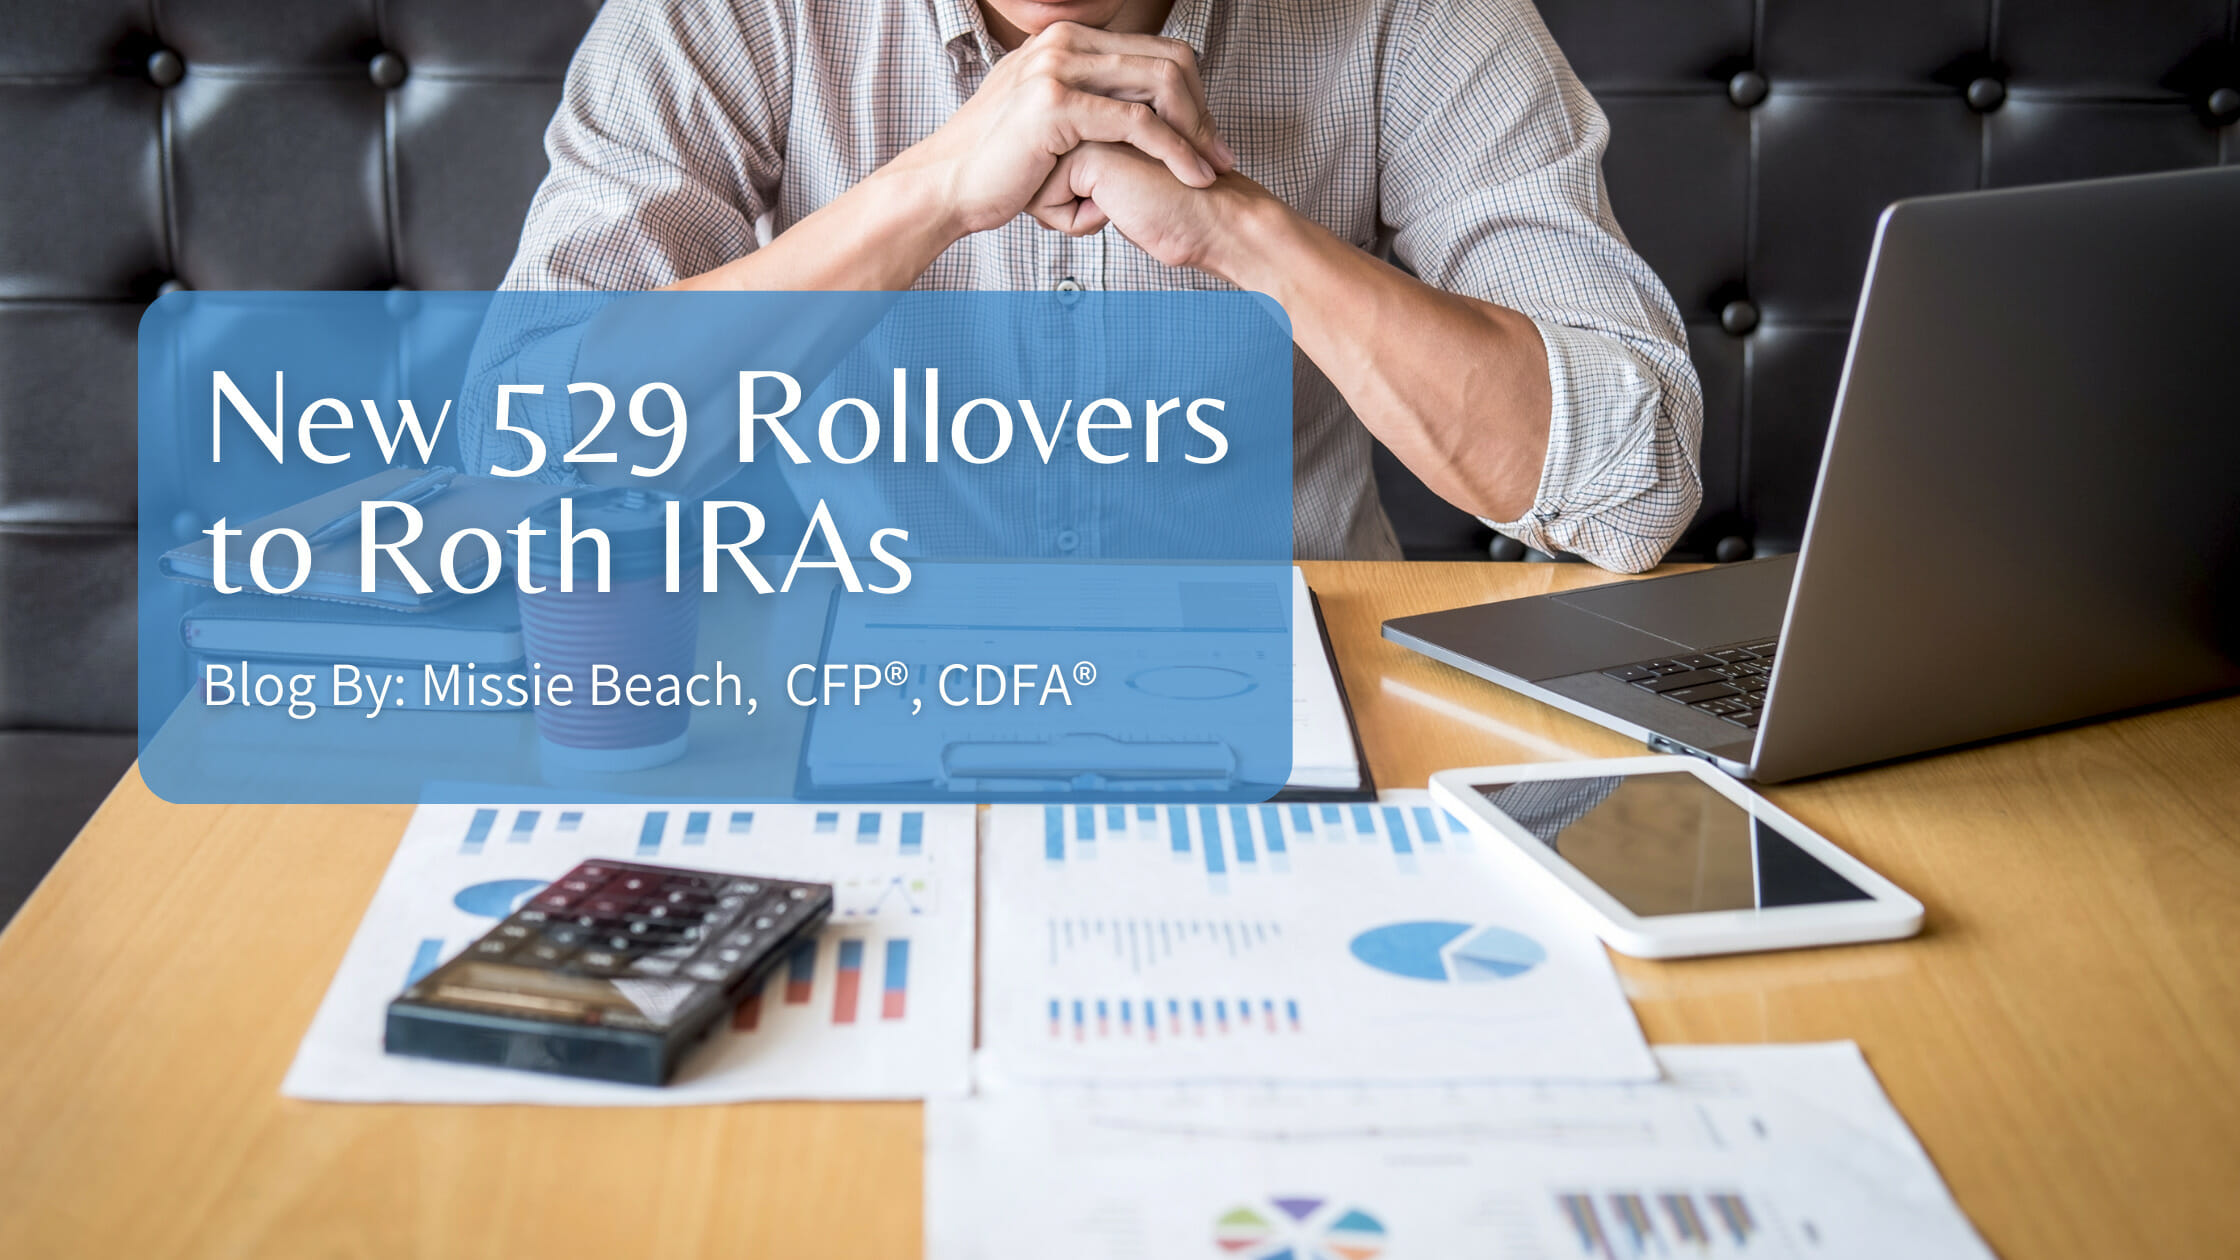 New 529 Rollovers to Roth IRAs